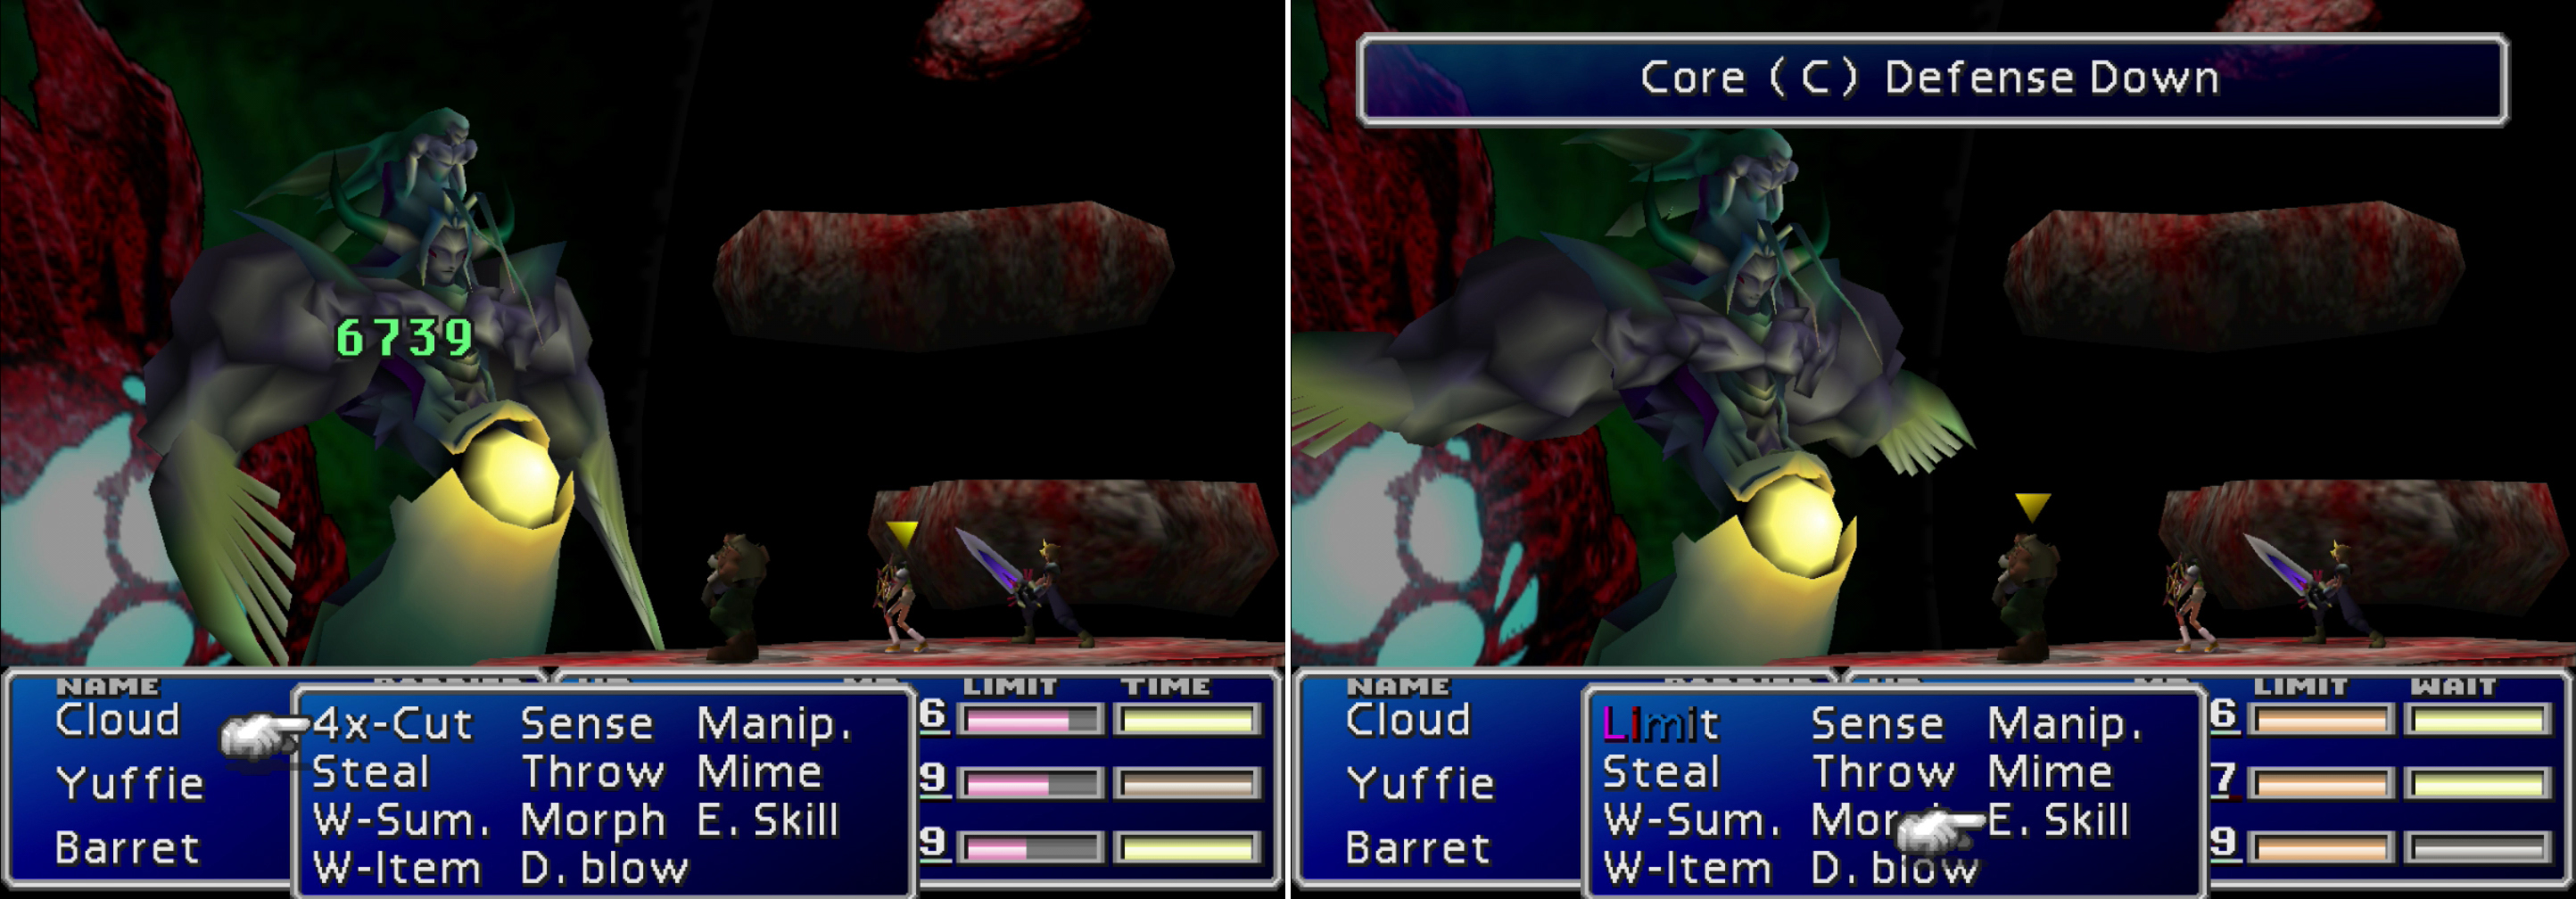 Bizarro Sephiroth will regularly heal itself with Bizarro Energy (left) unless you can take out its core. To leave the core vulnerable you have to destroy one of its arms (left) which will cast offensive spells while alive.